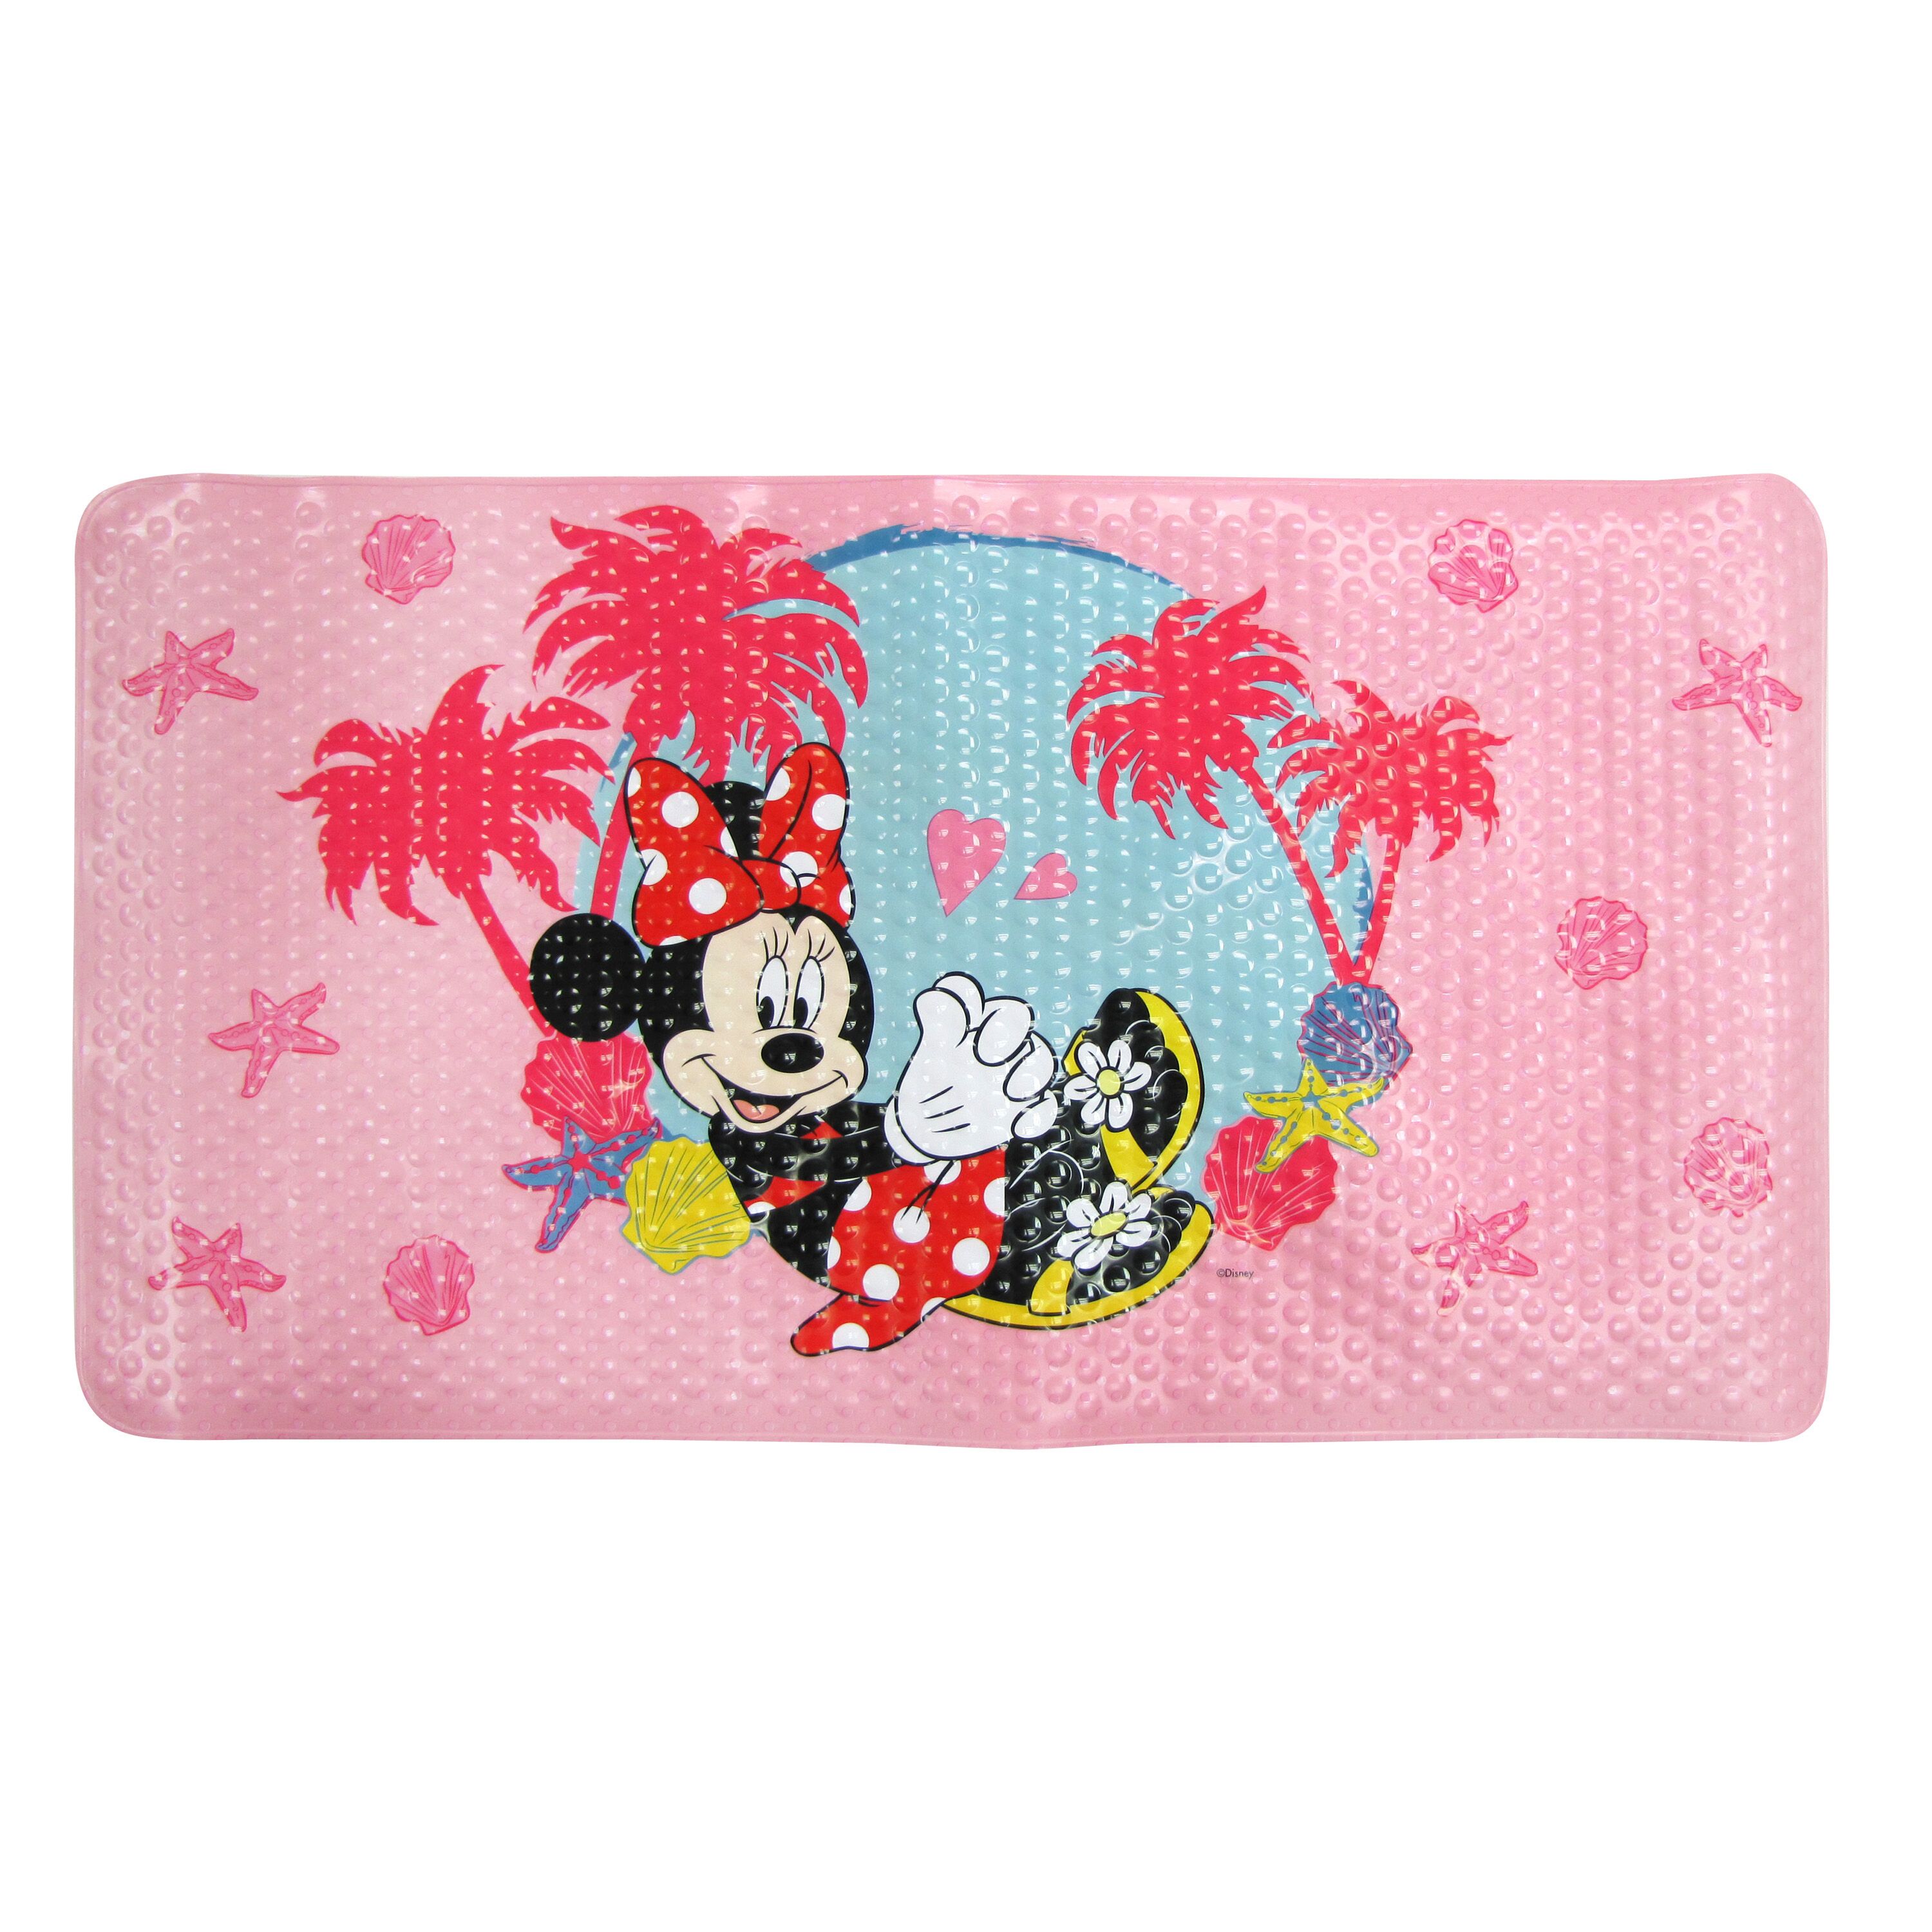 Ginsey Disney Minnie Mouse Color Changing Bath Mat 15 X 27 